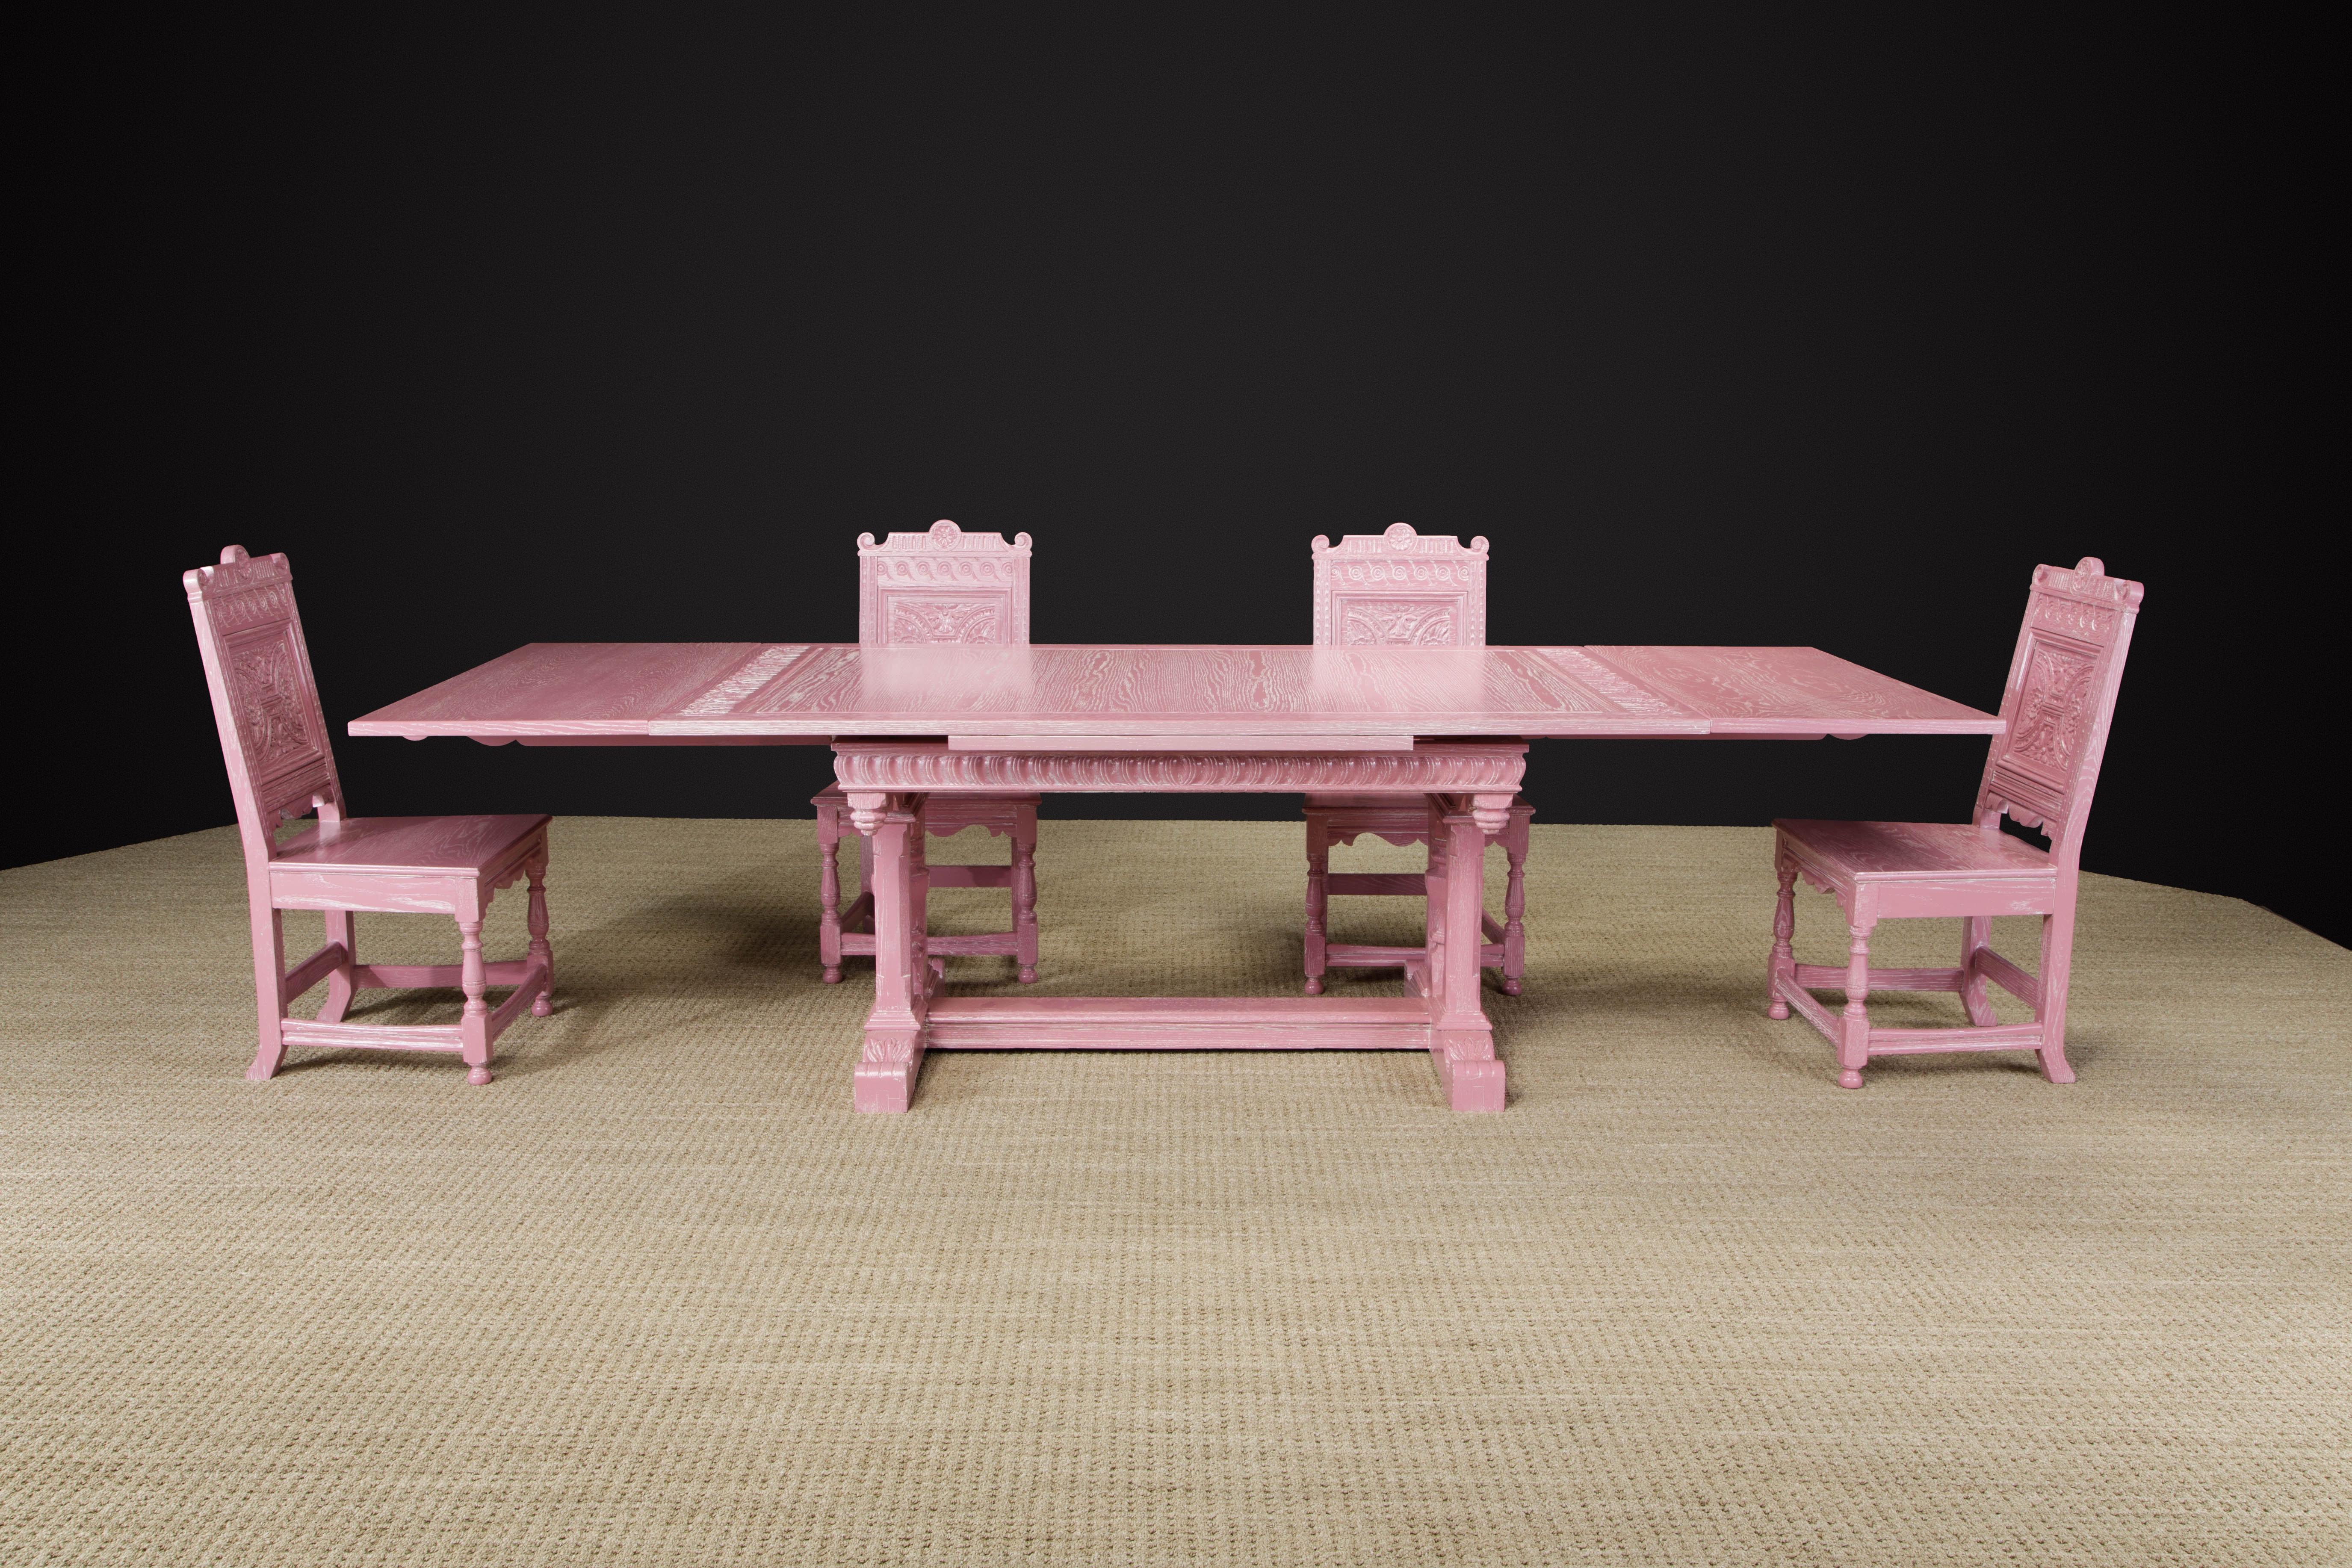 For the designer looking for something unusual and a little bit on the wild side, this gorgeous pink cerused carved oak dining set is in the Jacobean Revival style with intricate detailing and newly restored. We estimate the original production of